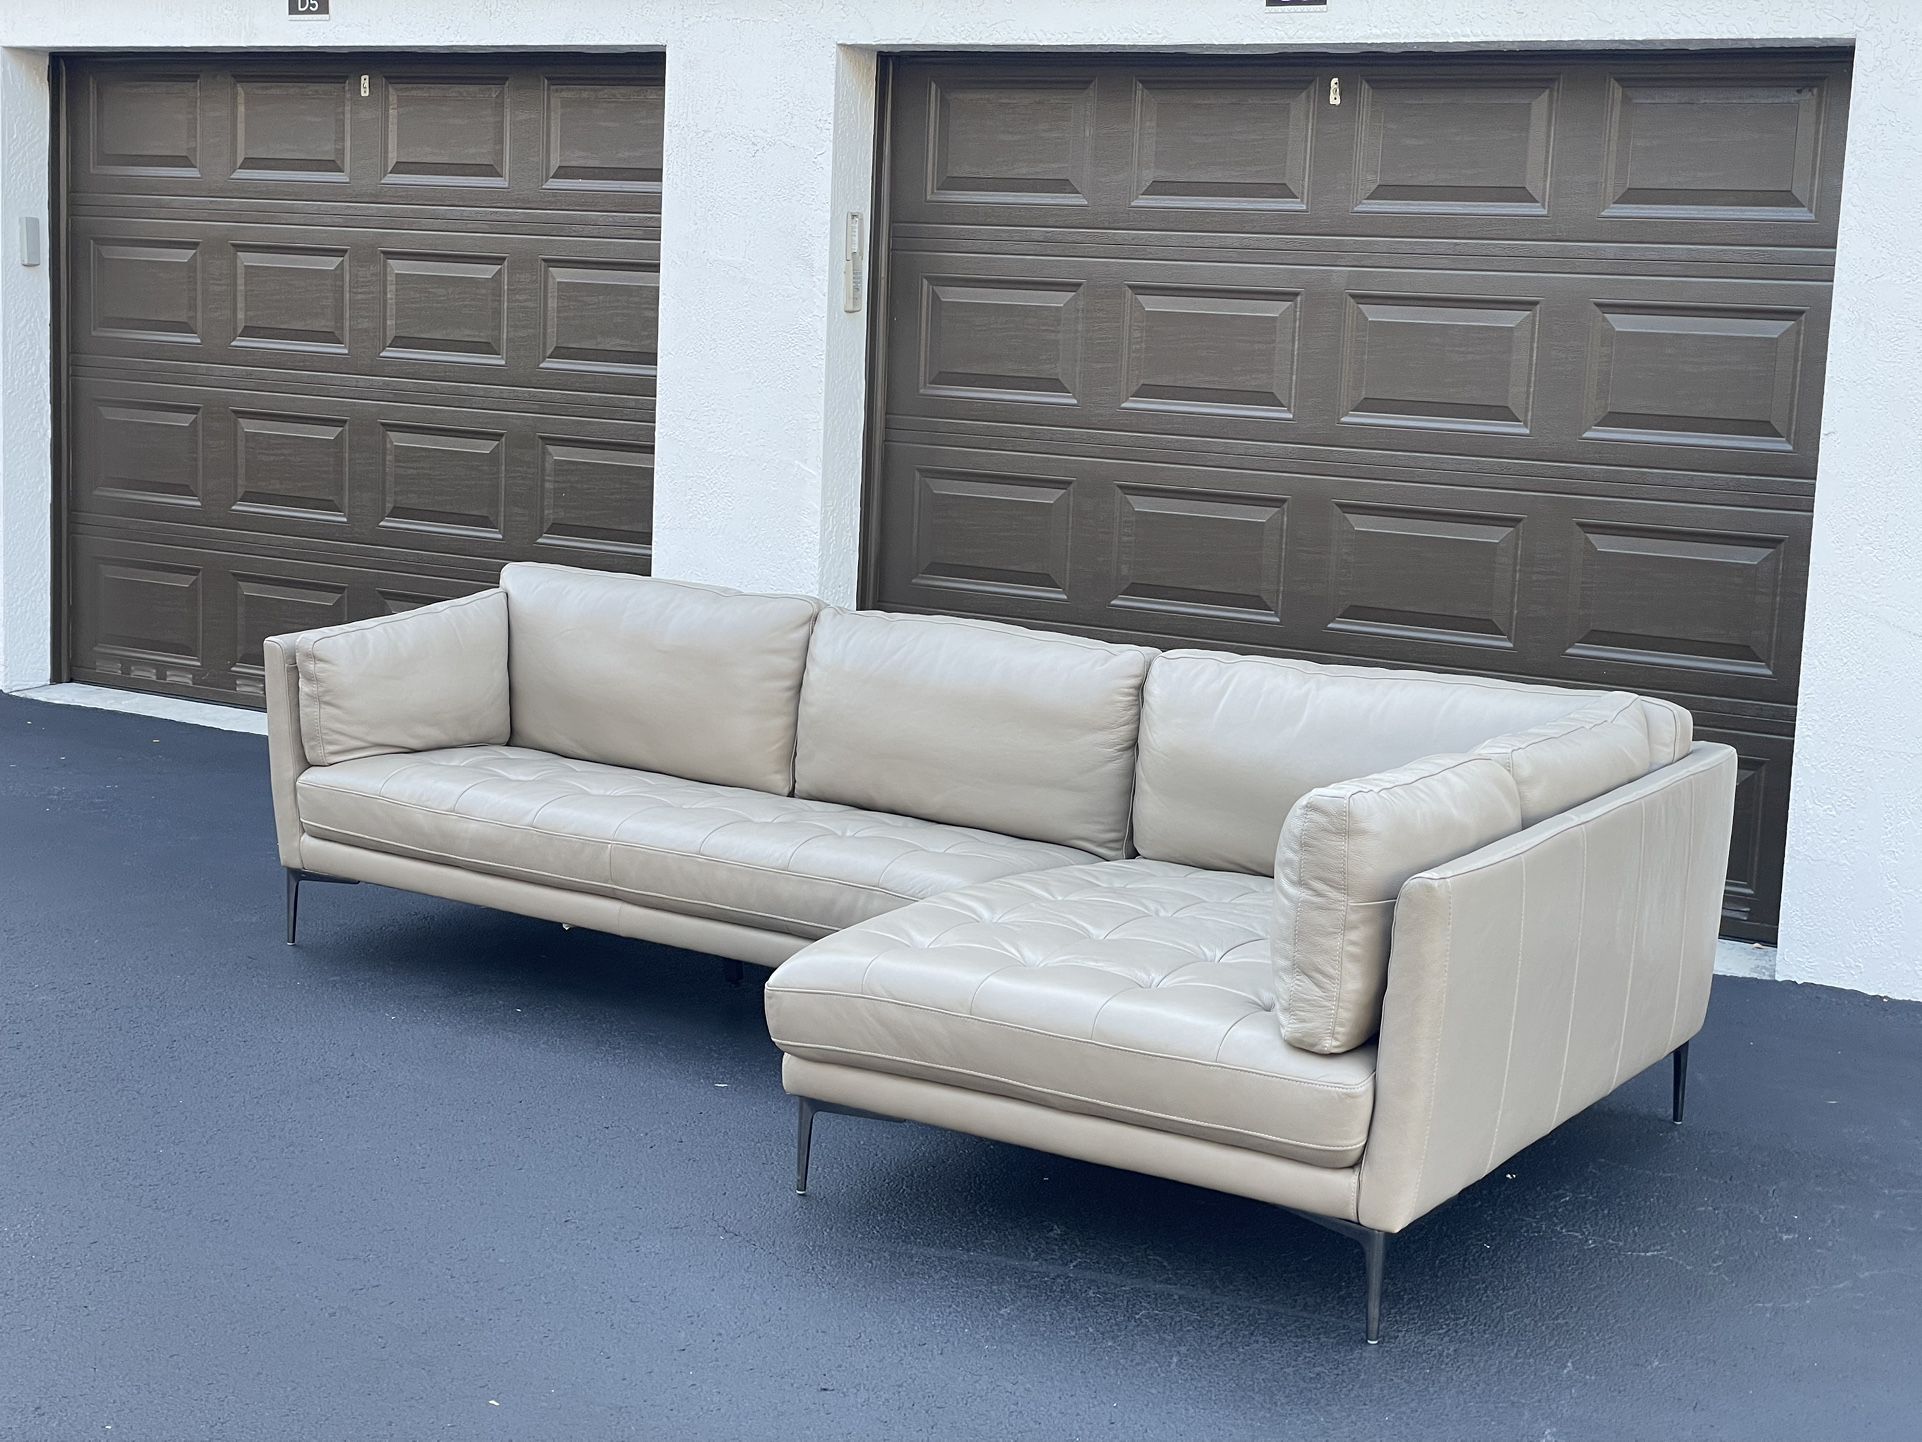 🛋️ Sectional Couch/Sofa - Beige - LIKE NEW - Delivery Available 🚛